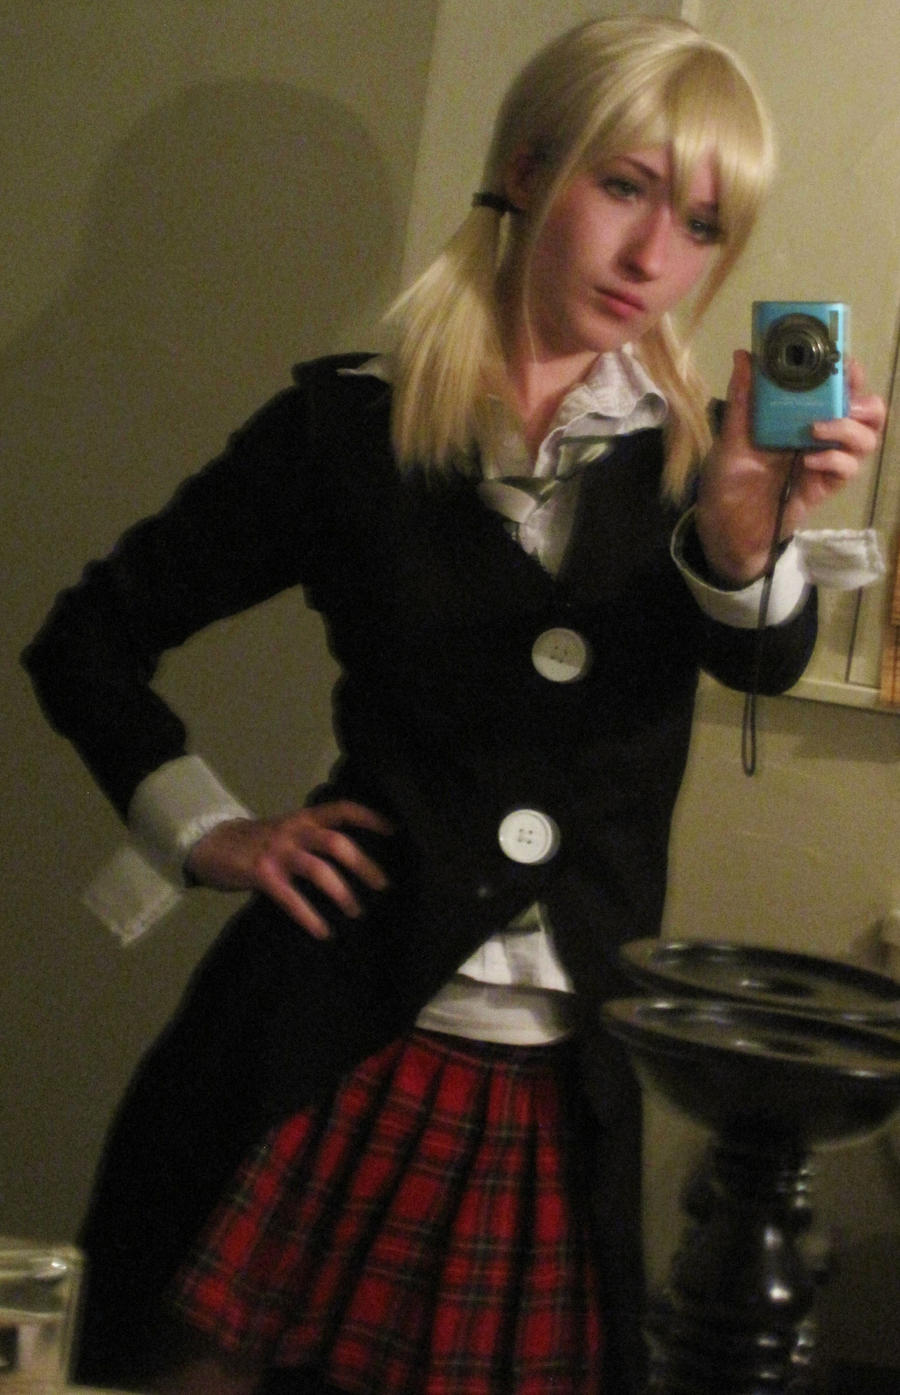 Maka Soul Eater Cosplay WIP by broken-with-roses on DeviantArt